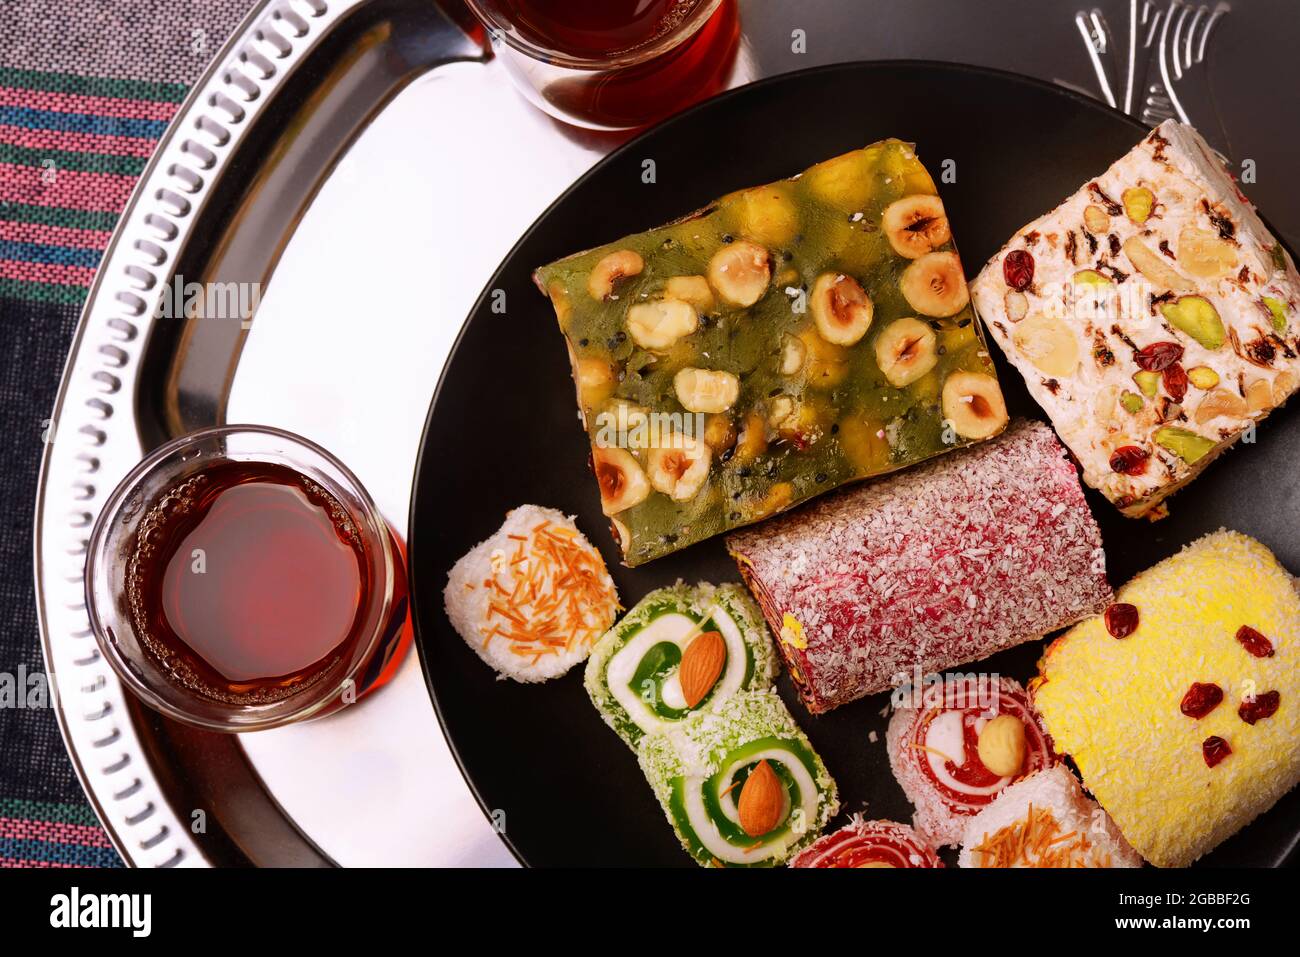 Top view of various traditional turkish delights with nuts and tea glasses Stock Photo